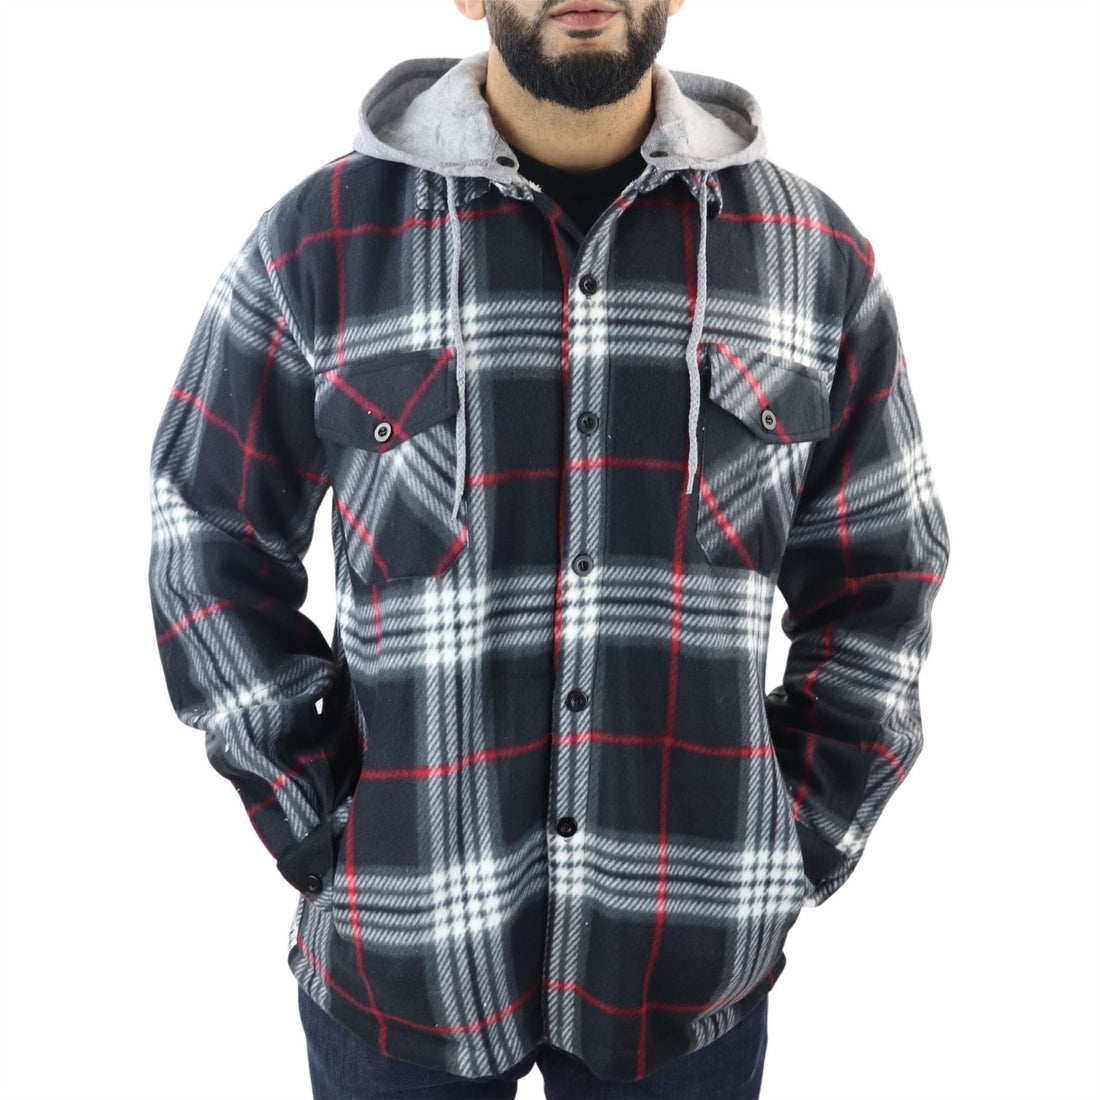 Men's Jumper Thermal Fleece Fur Lined Lumberjack Removable Hooded Buttoned Check Winter Shirt